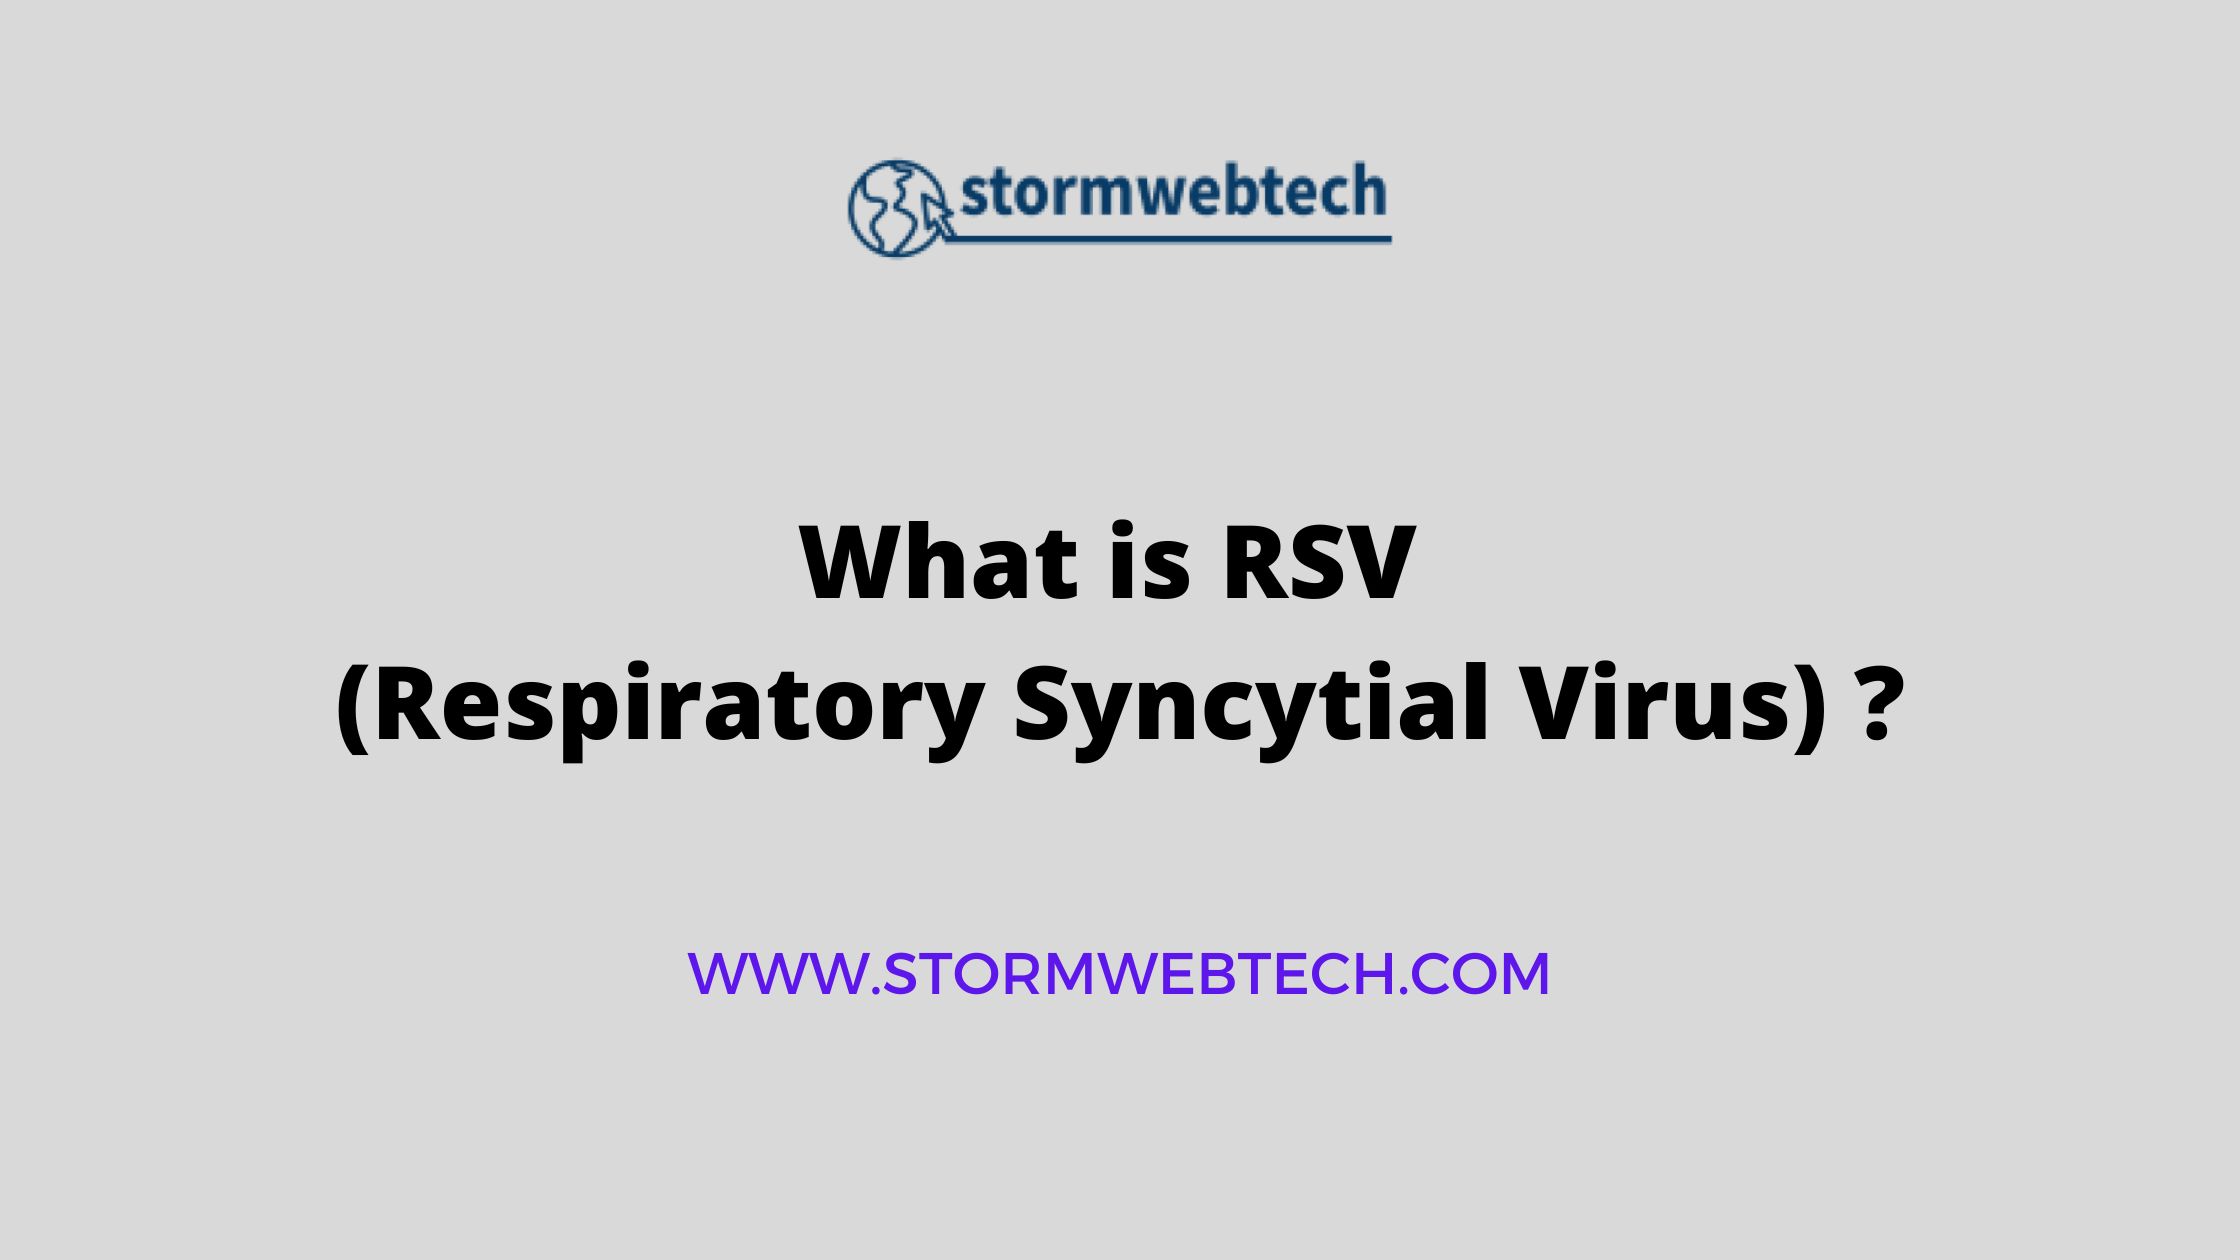 What is RSV?, How is RSV caused?, Symptoms of RSV, Diagnosis and Treatment of RSV, Prevention of RSV, Respiratory Syncytial Virus (RSV)